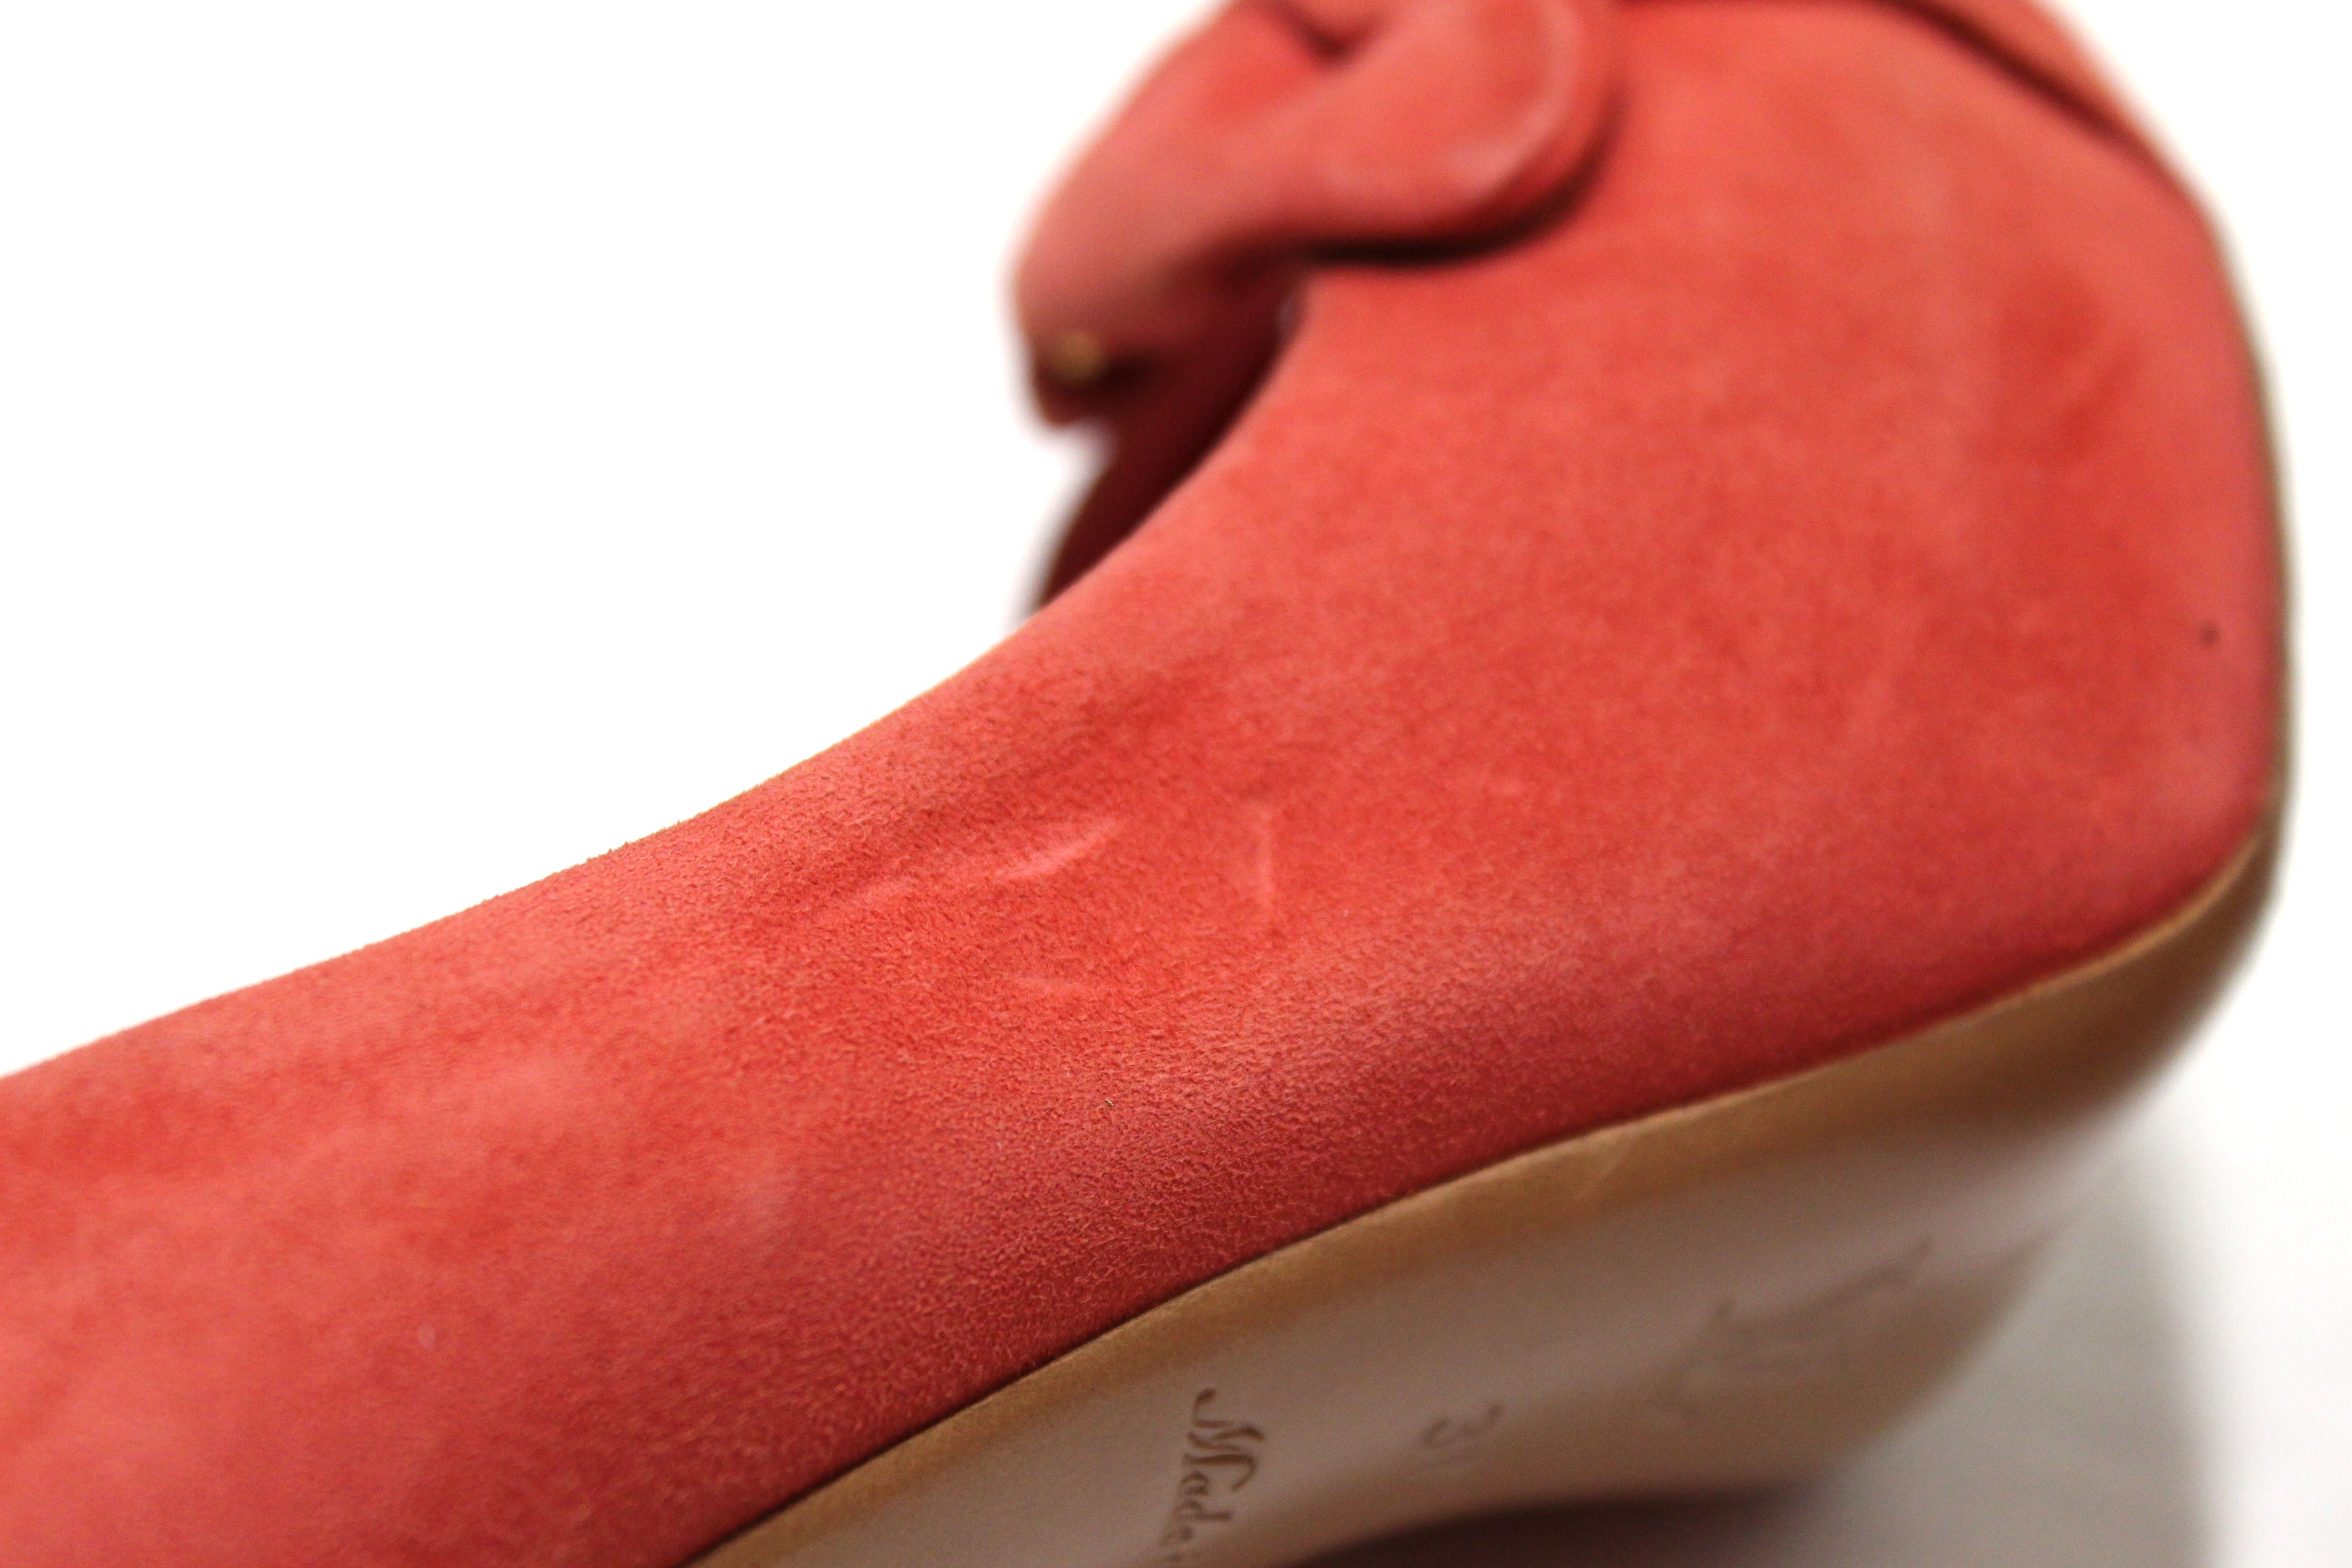 Louis Vuitton Red Vernis Leather Dice Pumps Size 37 at 1stDibs